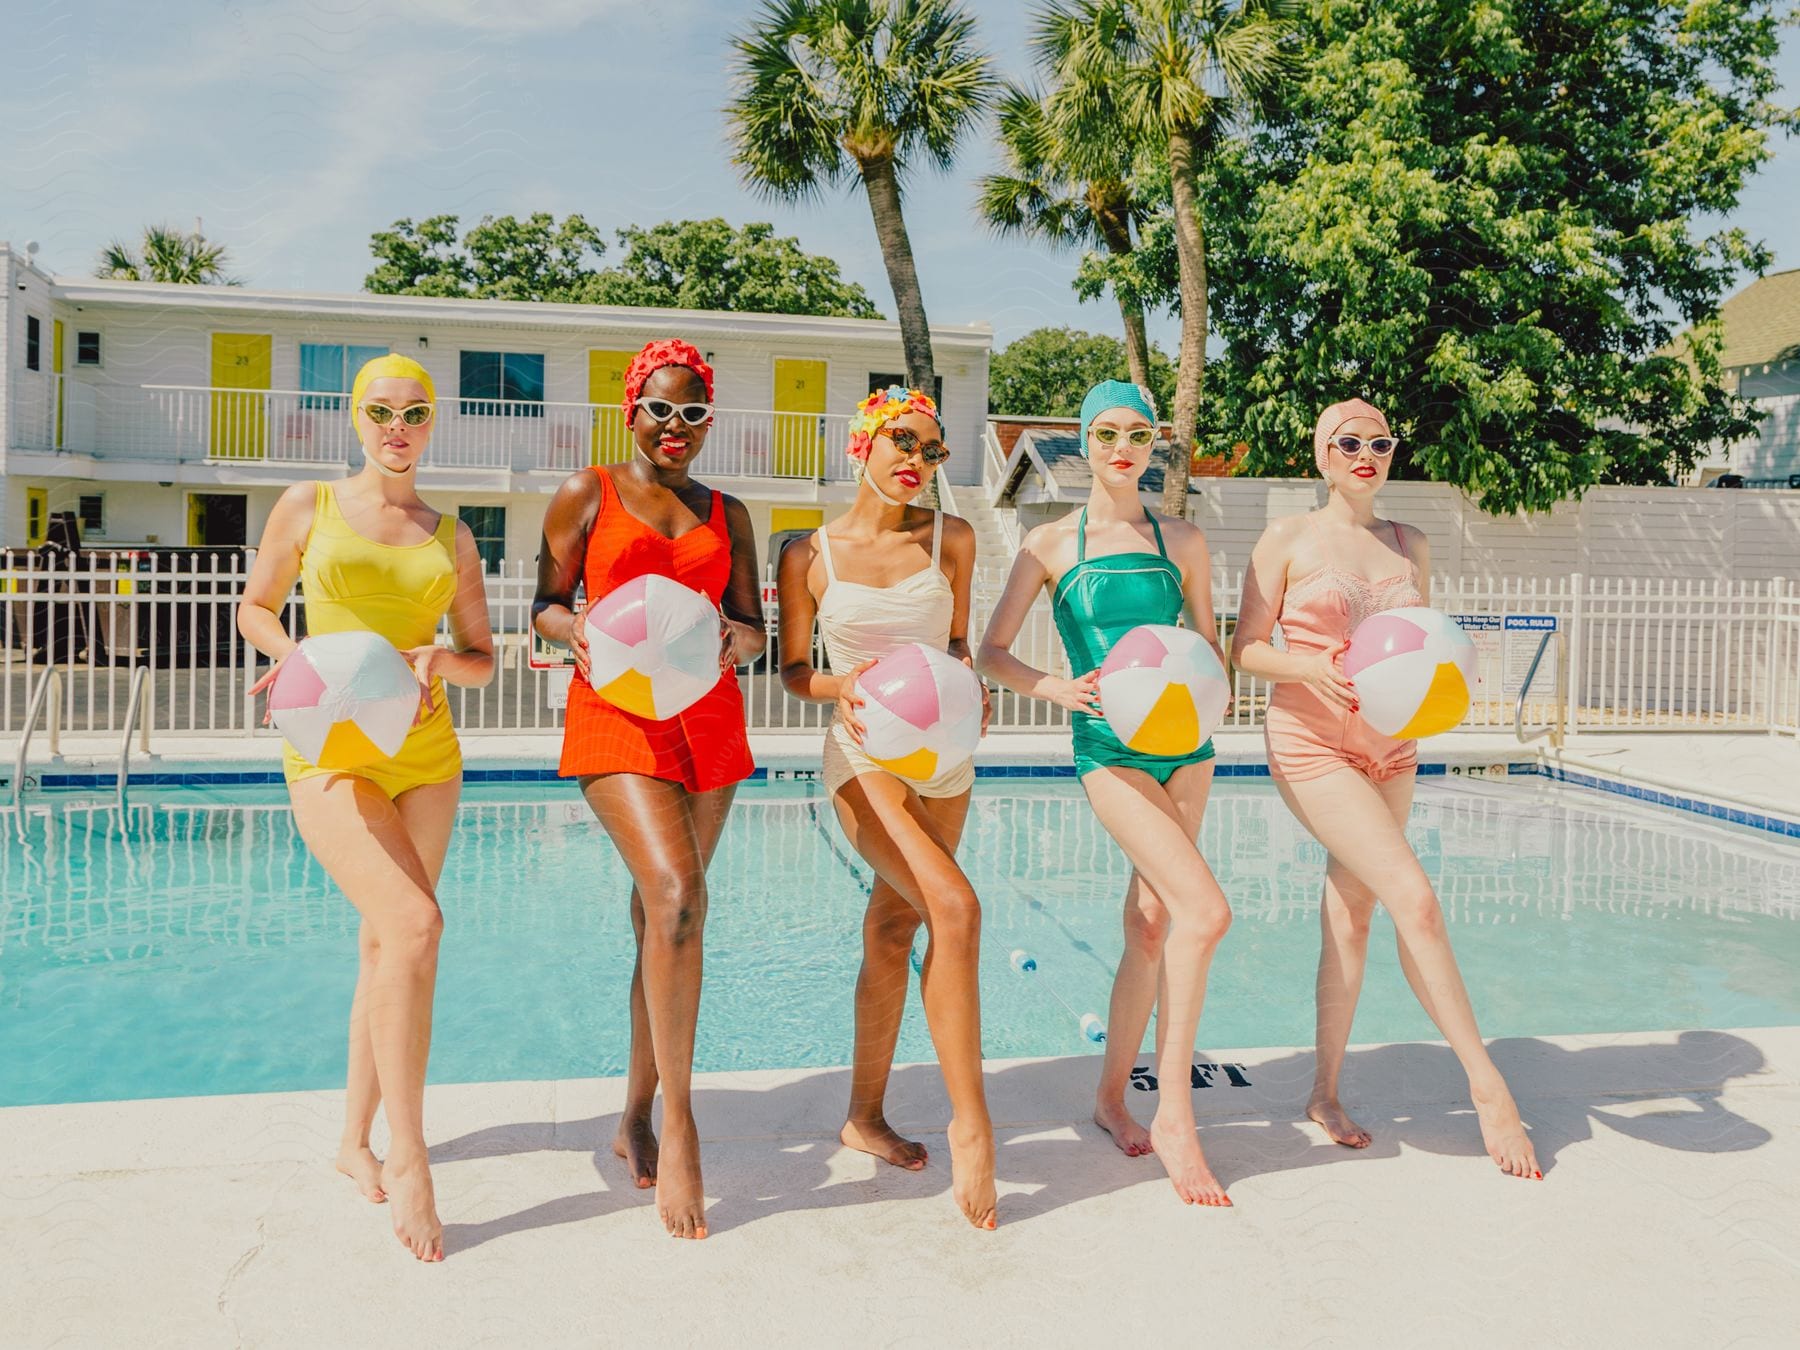 Young women in swimsuits, standing by the pool with their backs to the camera, holding a ball.